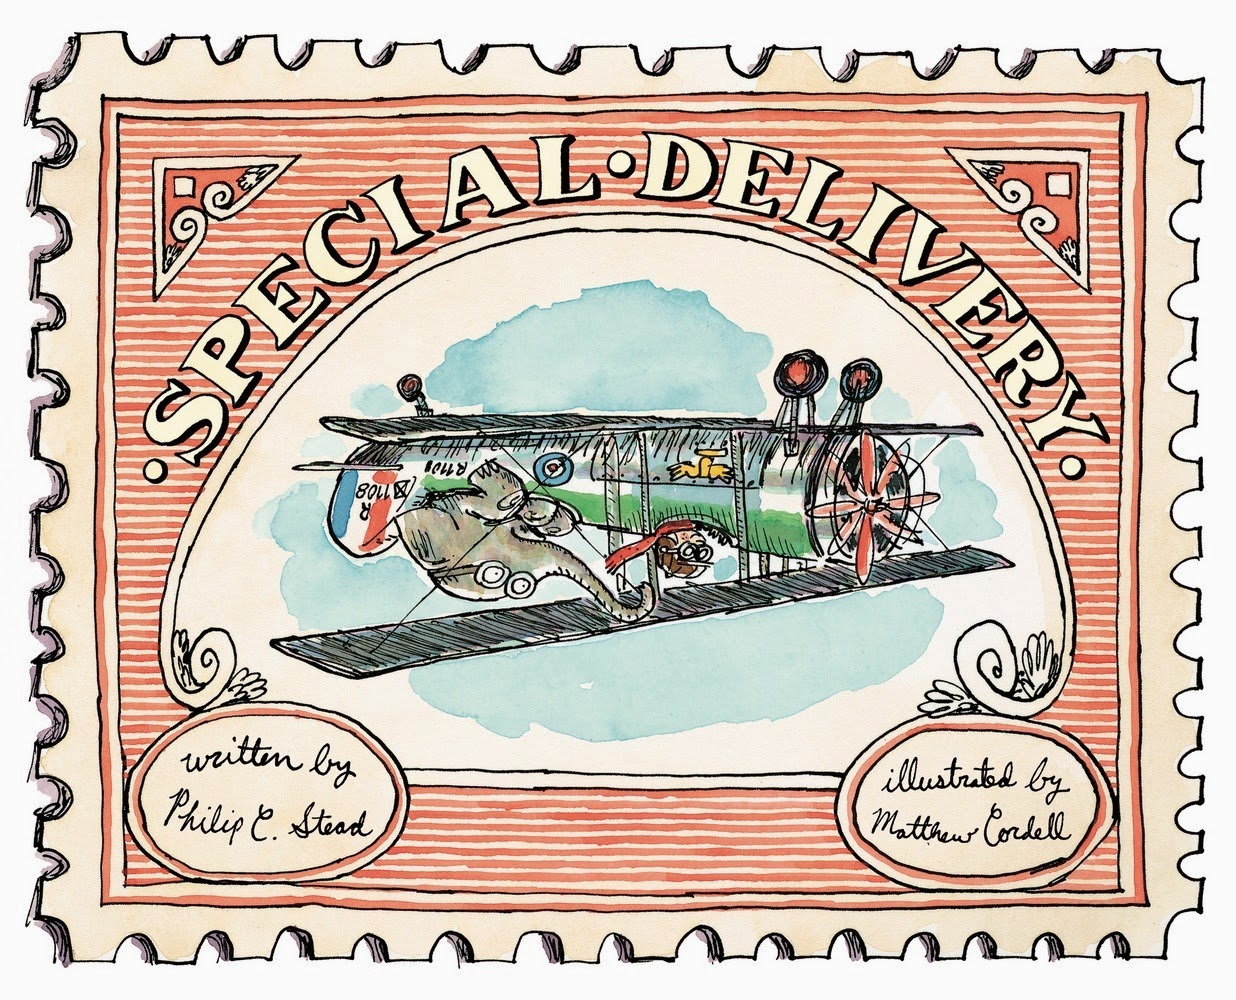 special delivery by philip c. stead, illustrated by matthew cordell